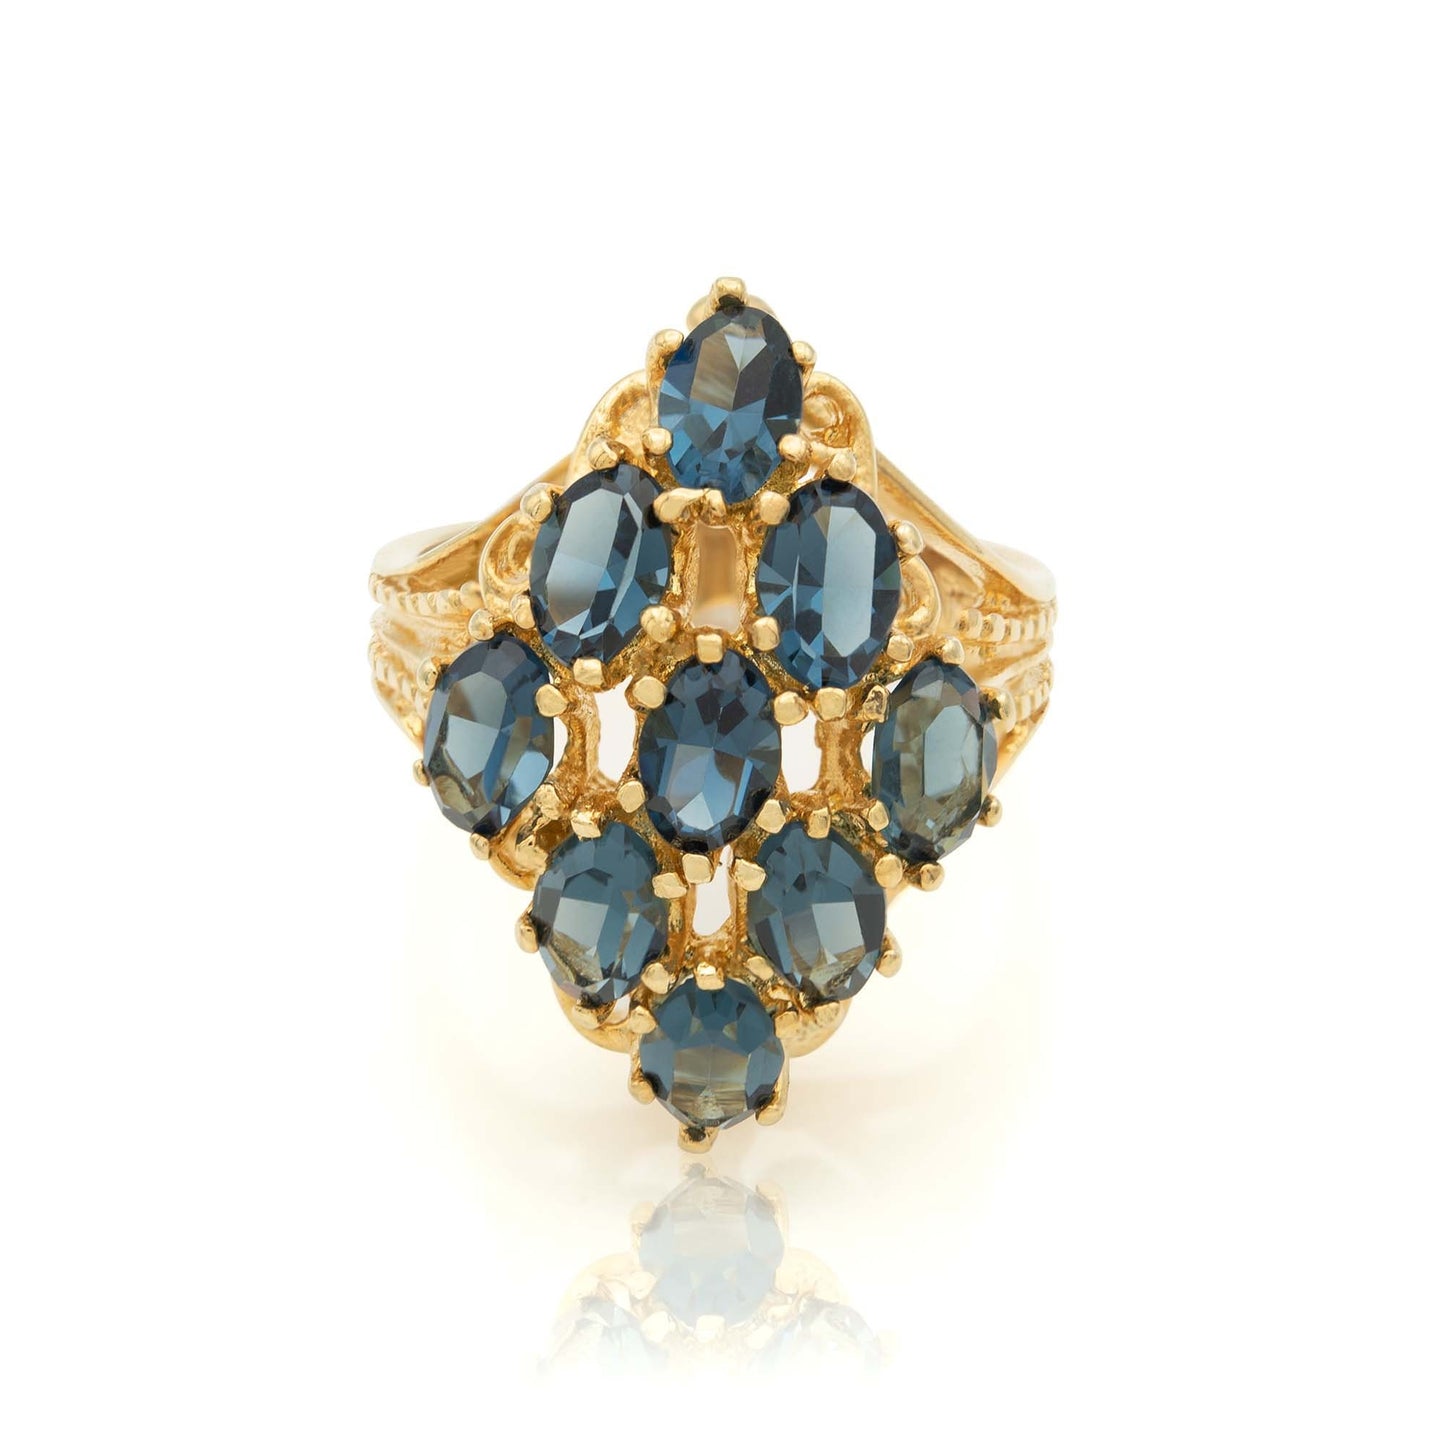 Vintage Ring Sapphire Austrian Crystal Cocktail Ring 18k Gold  R284 - Limited Stock - Never Worn